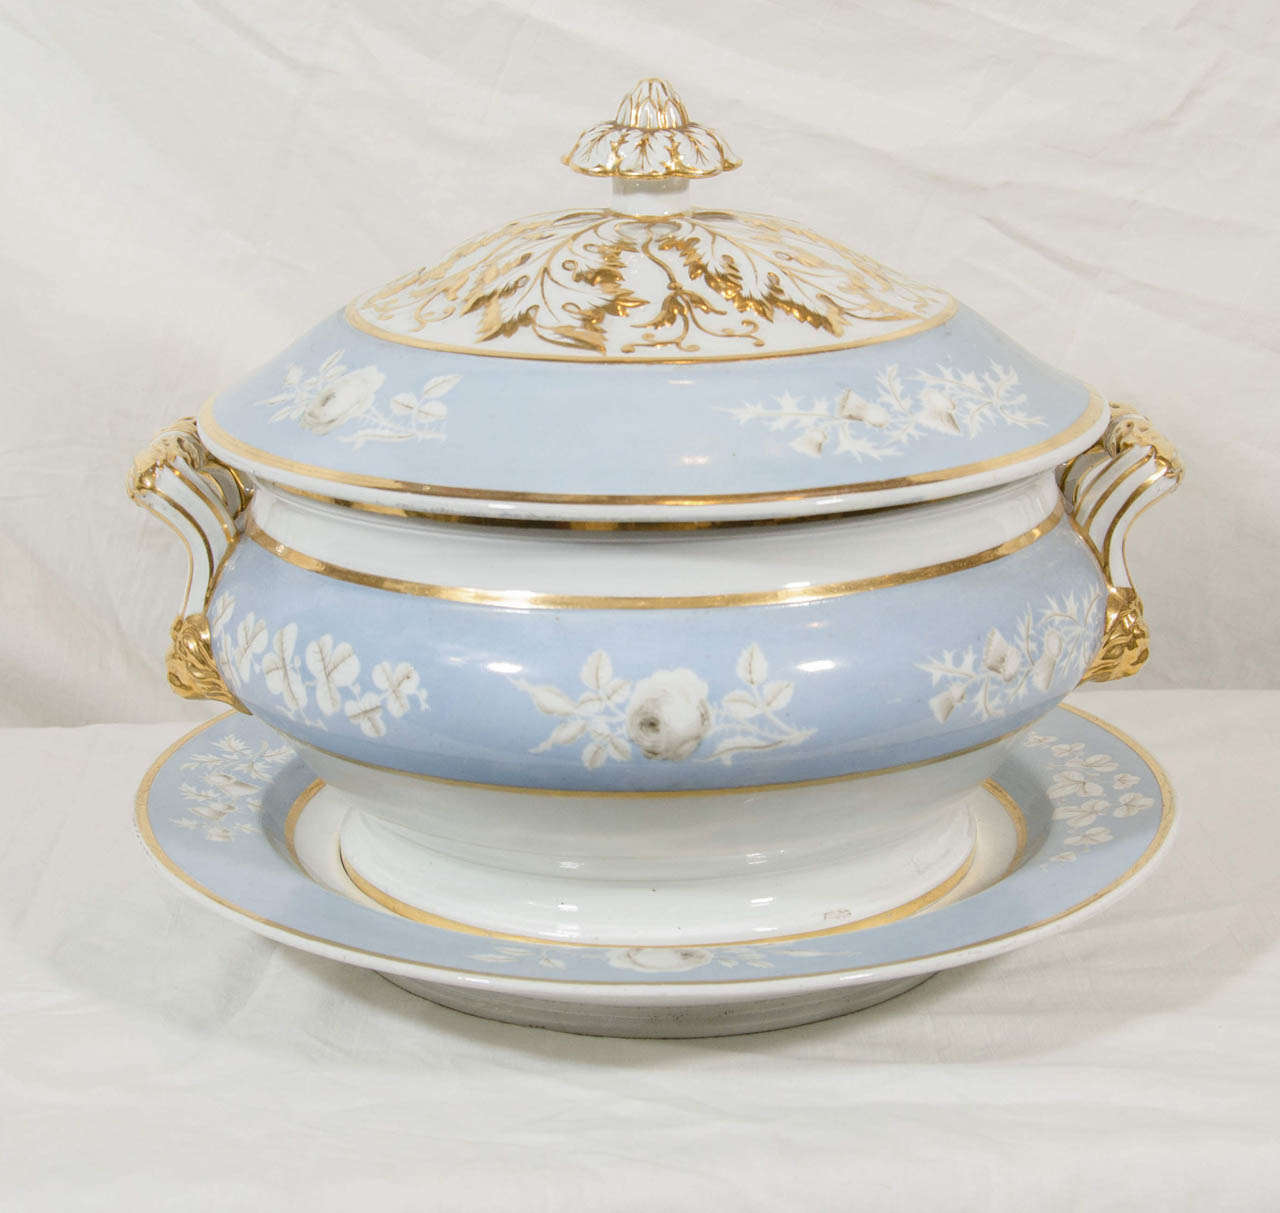 A standout Worcester soup tureen and stand painted baby blue and decorated with white roses, further decorated on the cover with outstanding gold gilding which also covers the finial and the handles. The tureen was made in England circa 1820 by